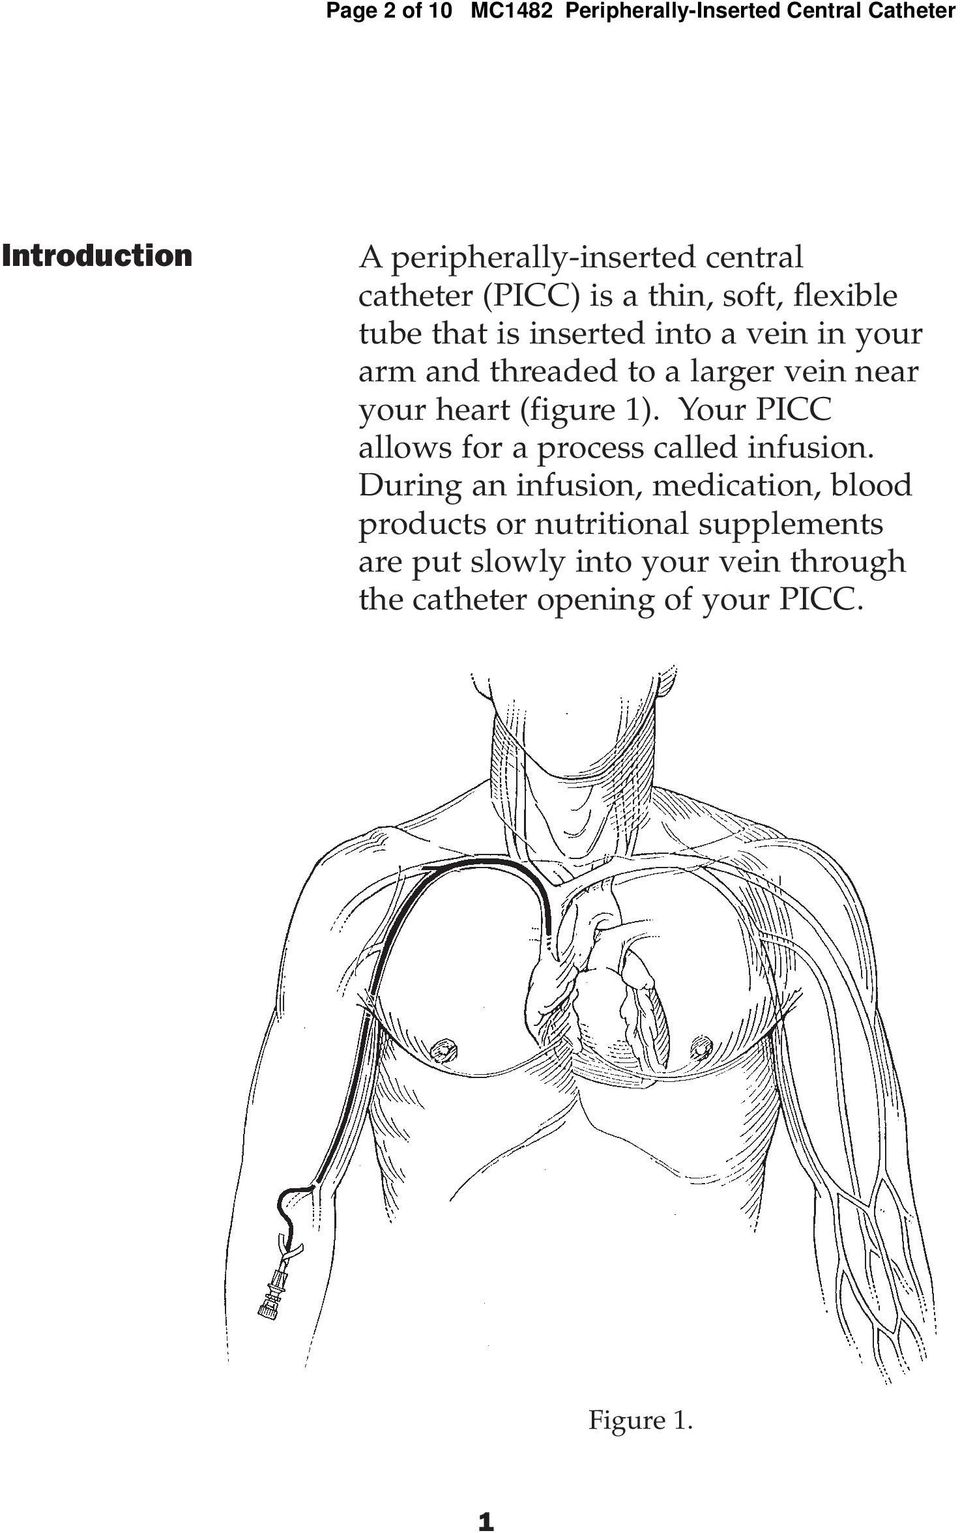 your heart (figure 1). Your PICC allows for a process called infusion.